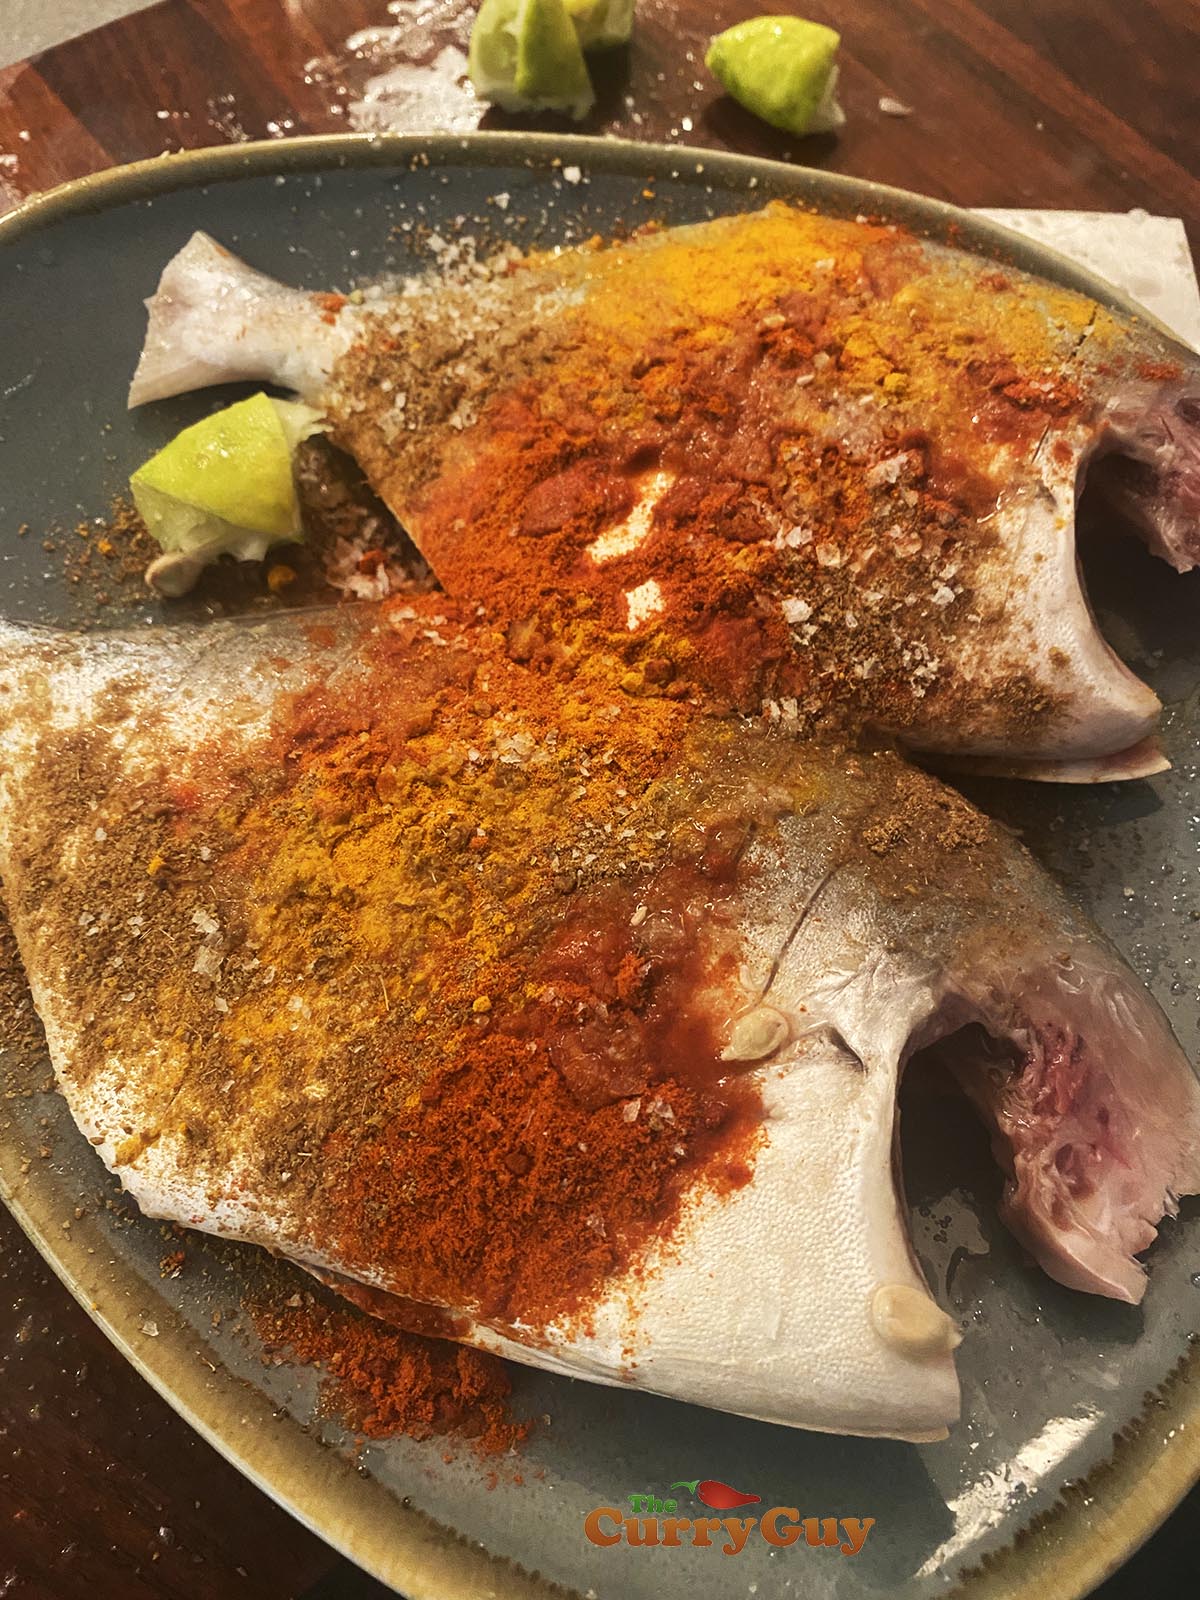 Rubbing spices on fish